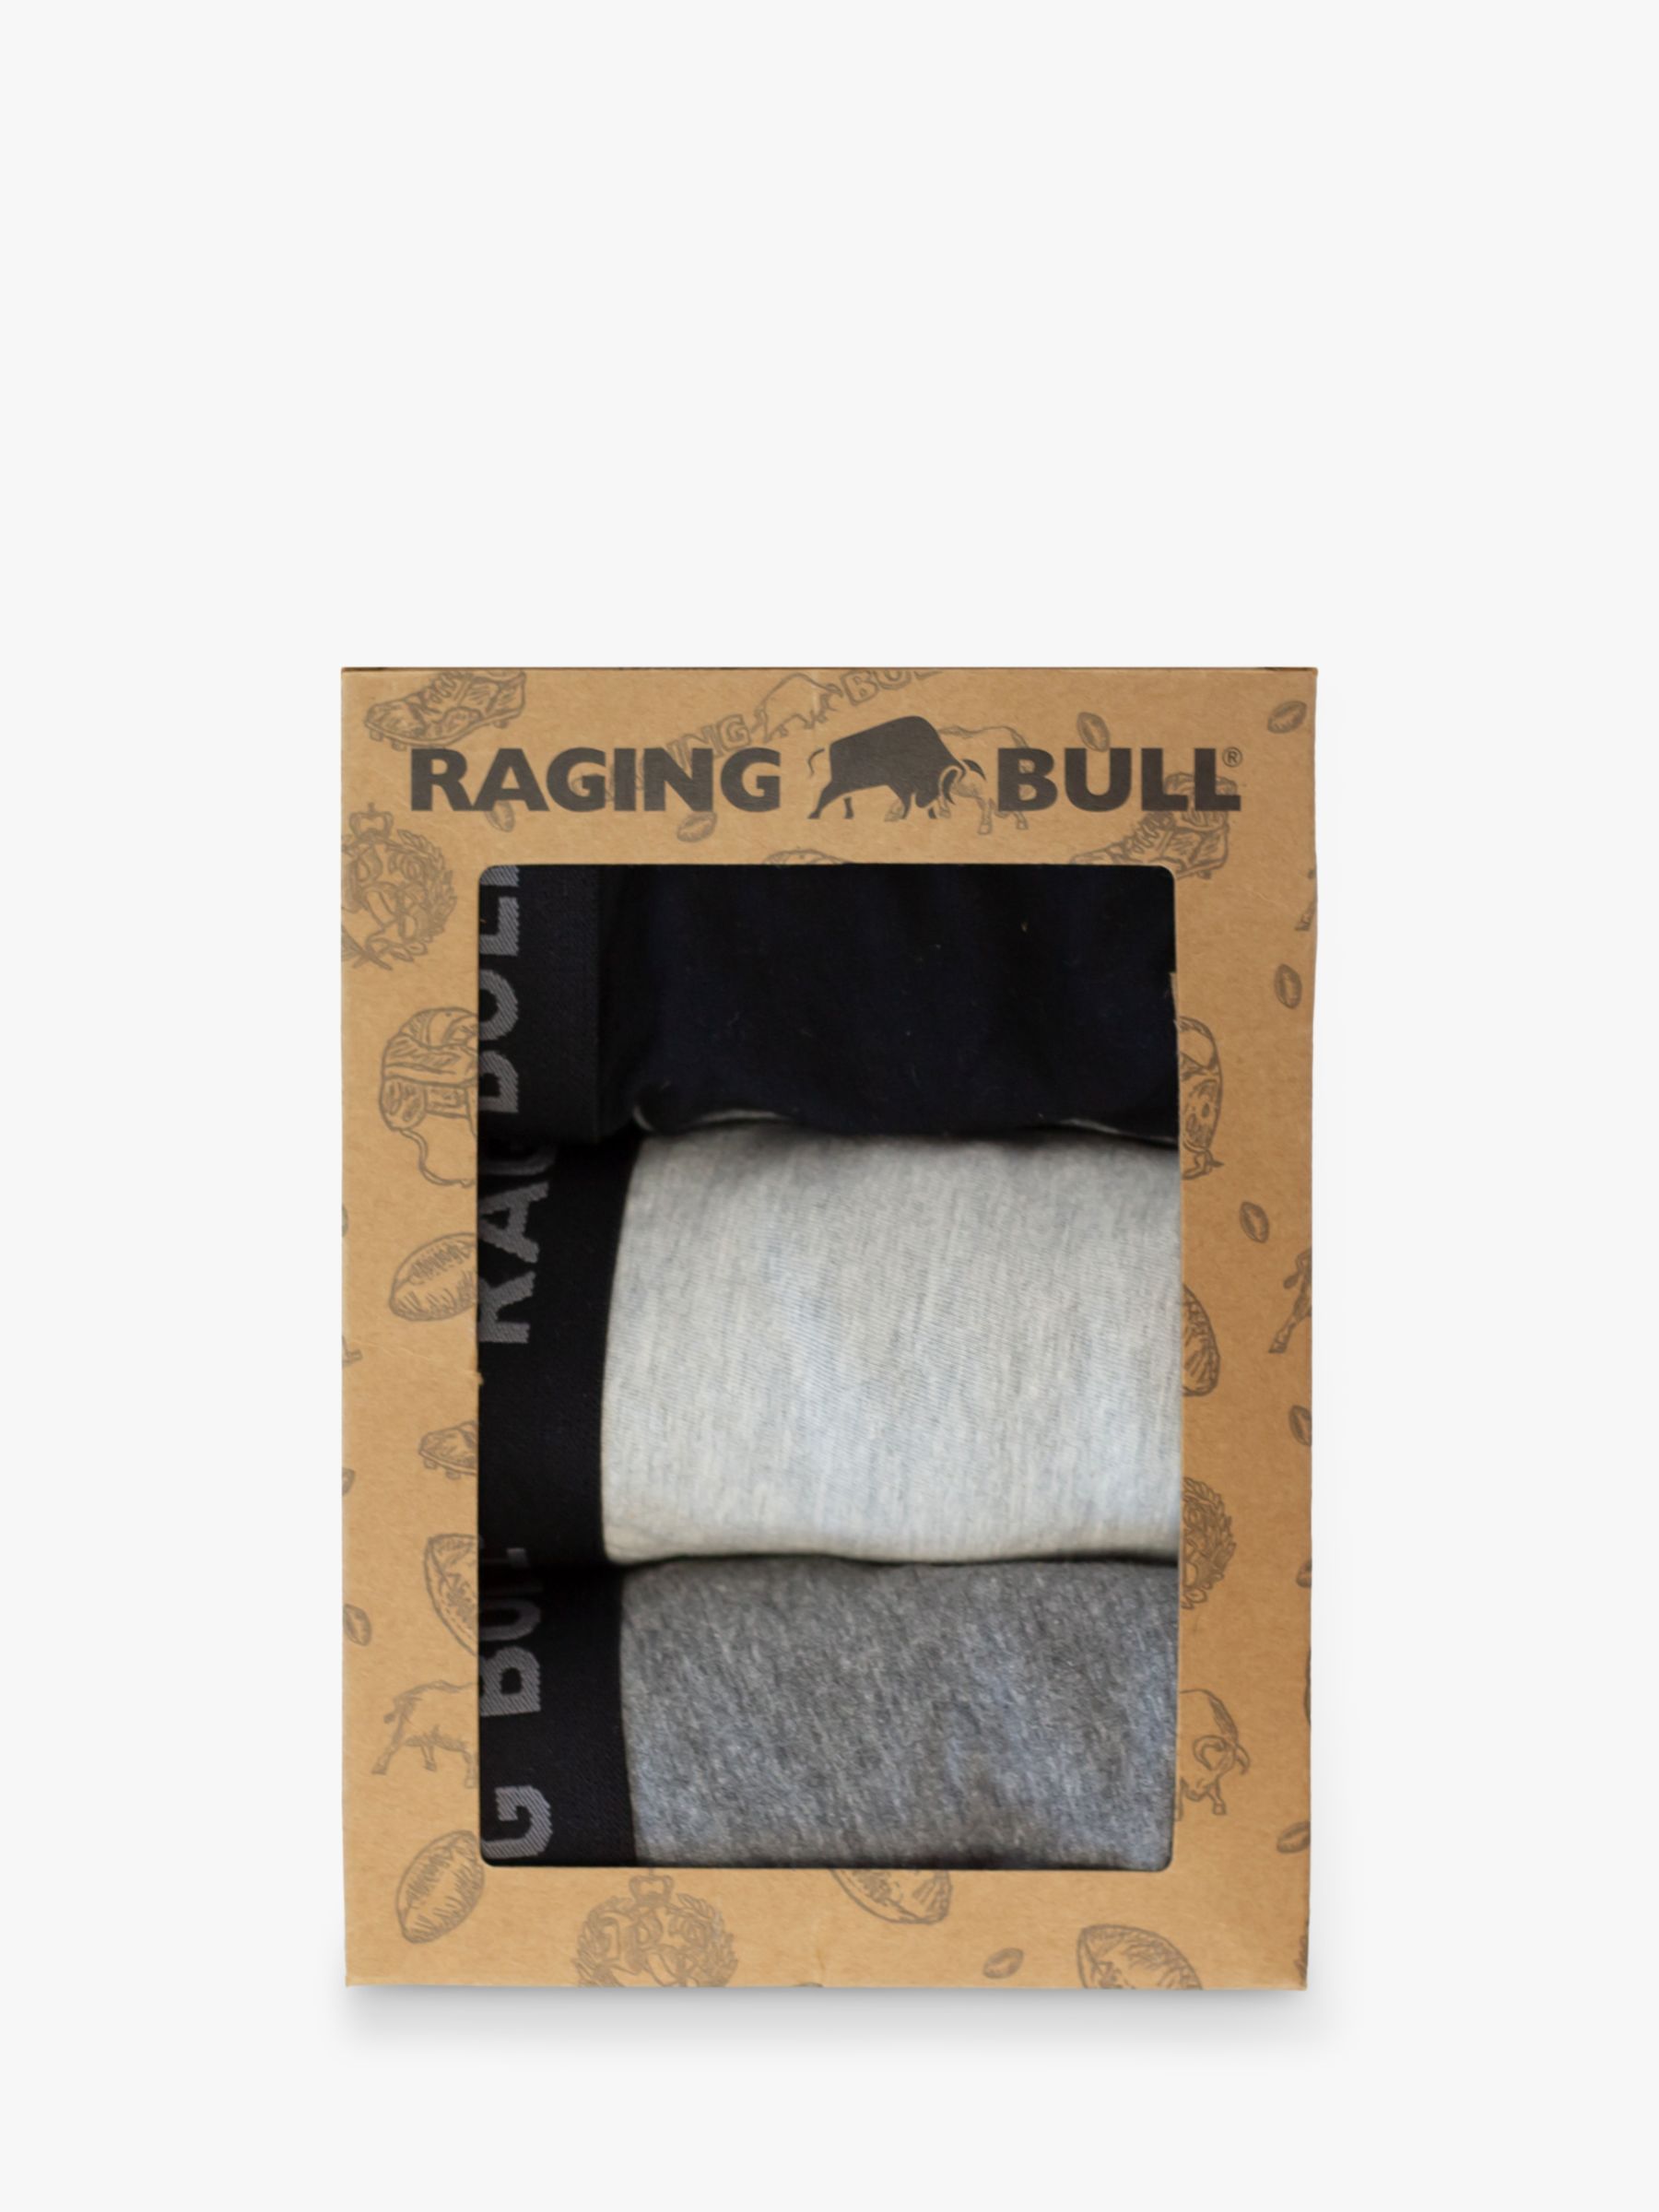 Raging Bull Cotton Stretch Boxers, Pack of 3, Black, S